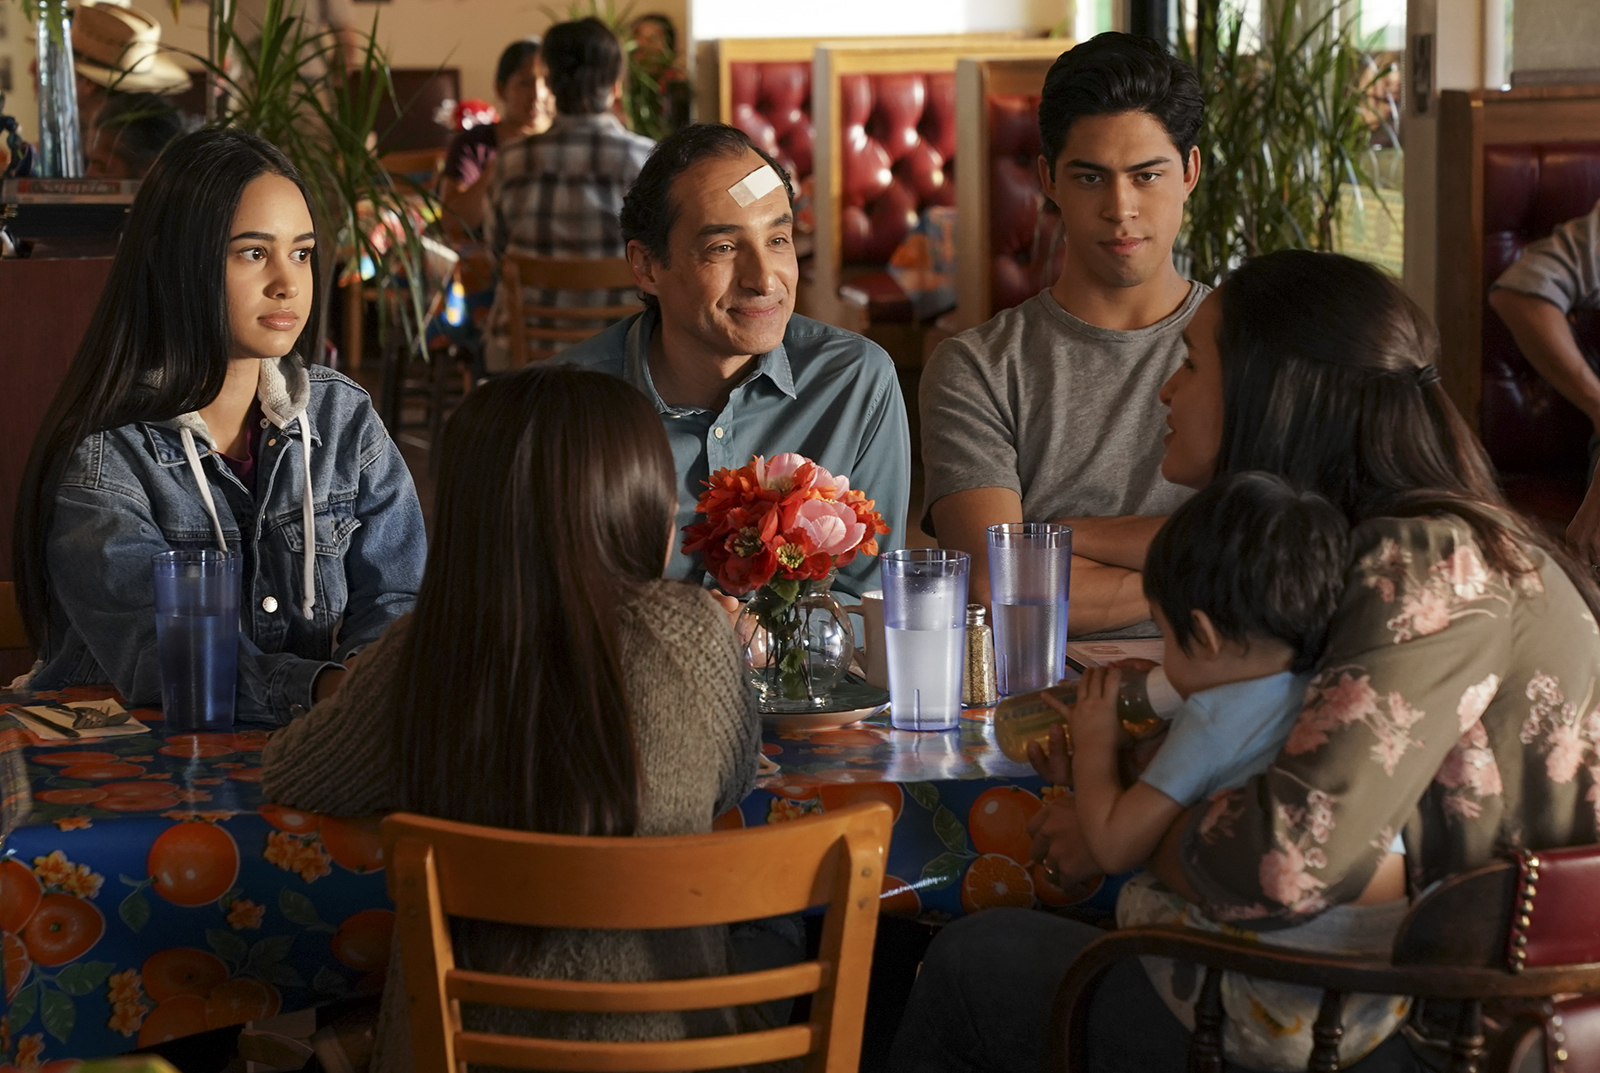 ‘Party of Five’ season 1 review – episode 9: ‘Mexico’ - Daily Bruin